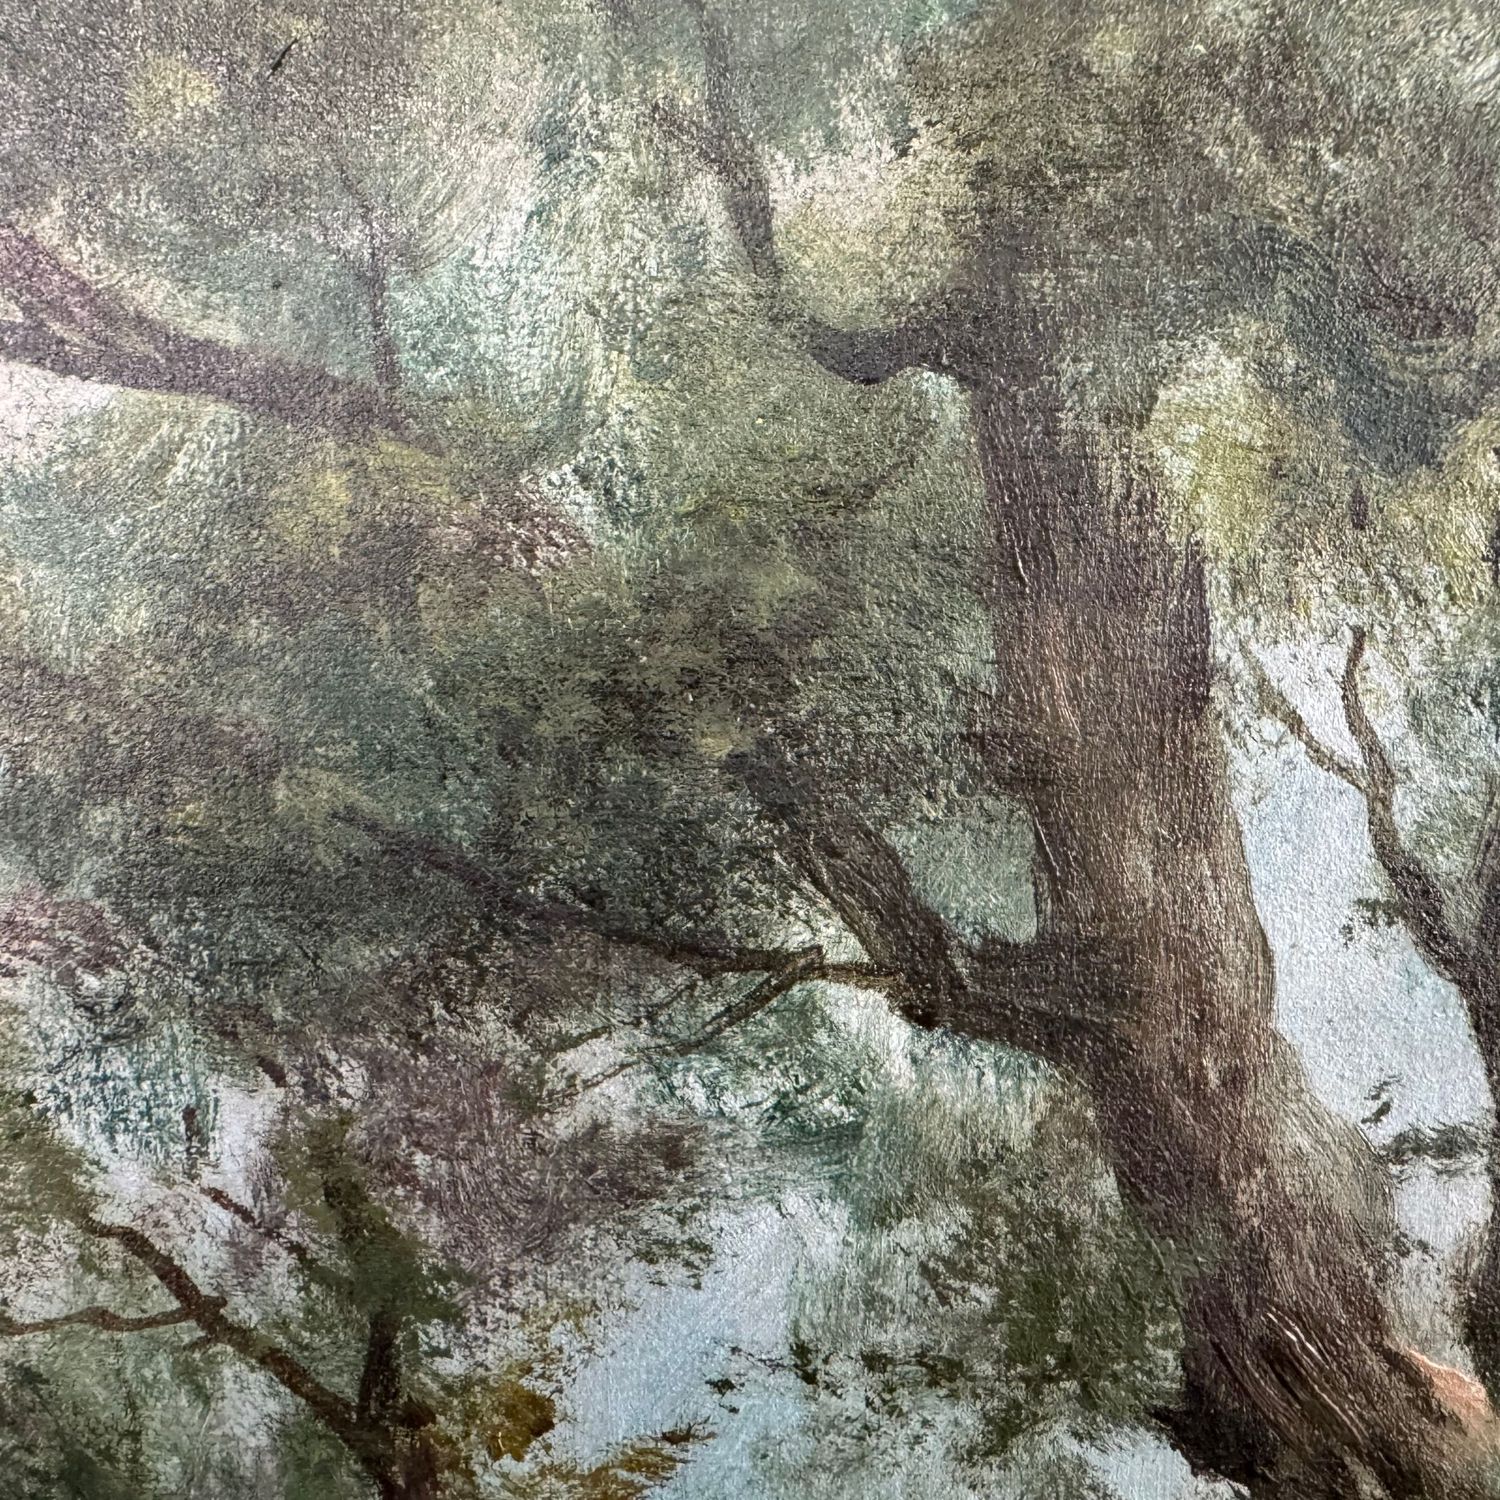 Wooded forest - F. Capuano (1854 - 1908) - Image 3 of 8